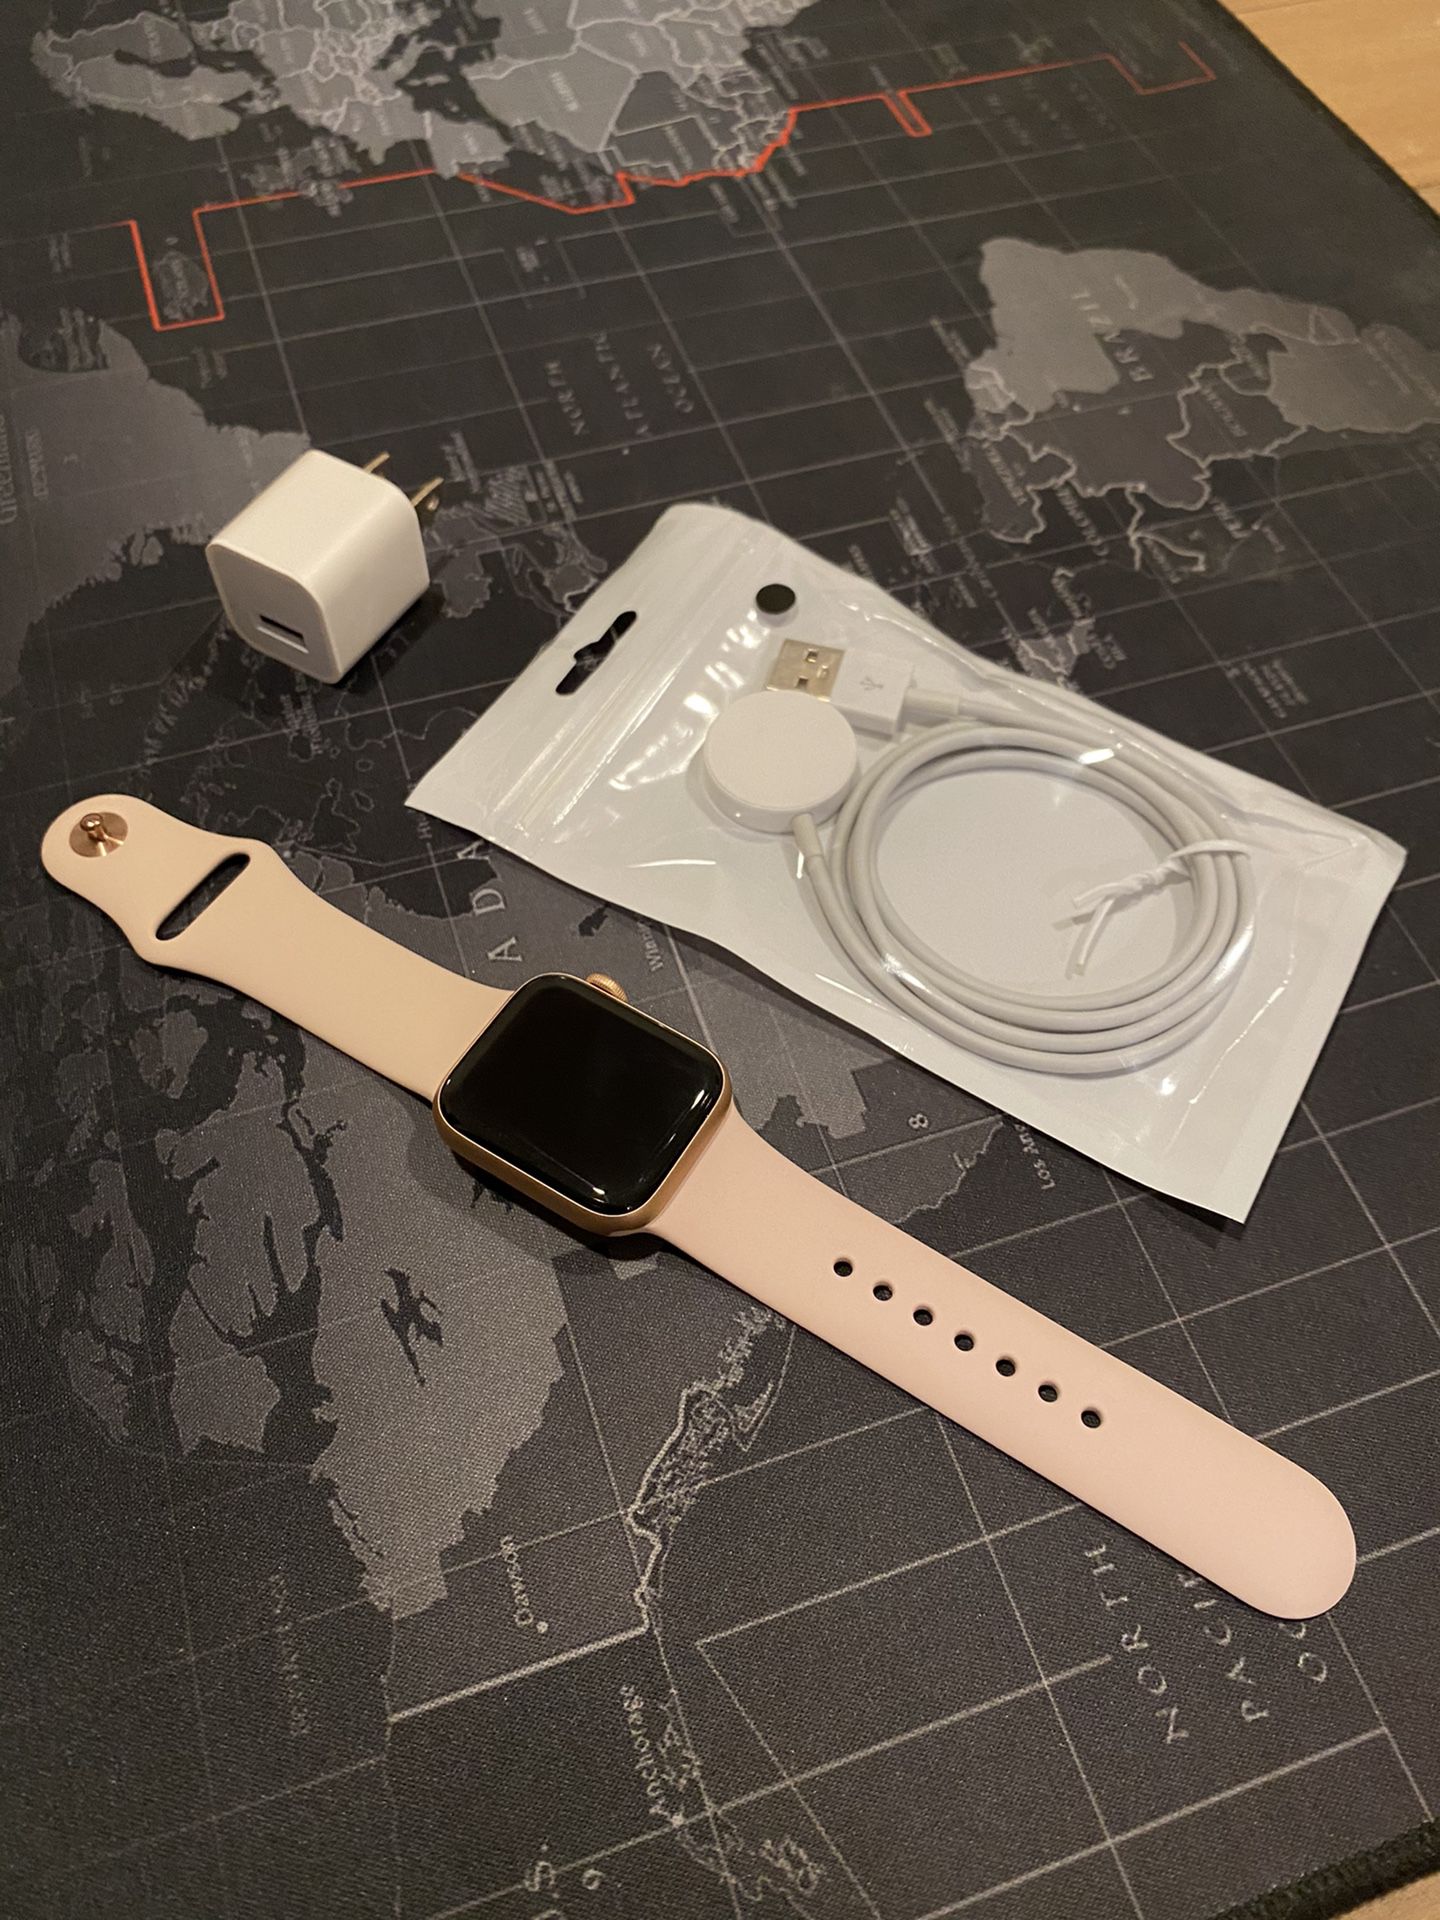 MINT Condition:🔥 Apple Watch Series 4 (Cellular + GPS WiFi) 40mm